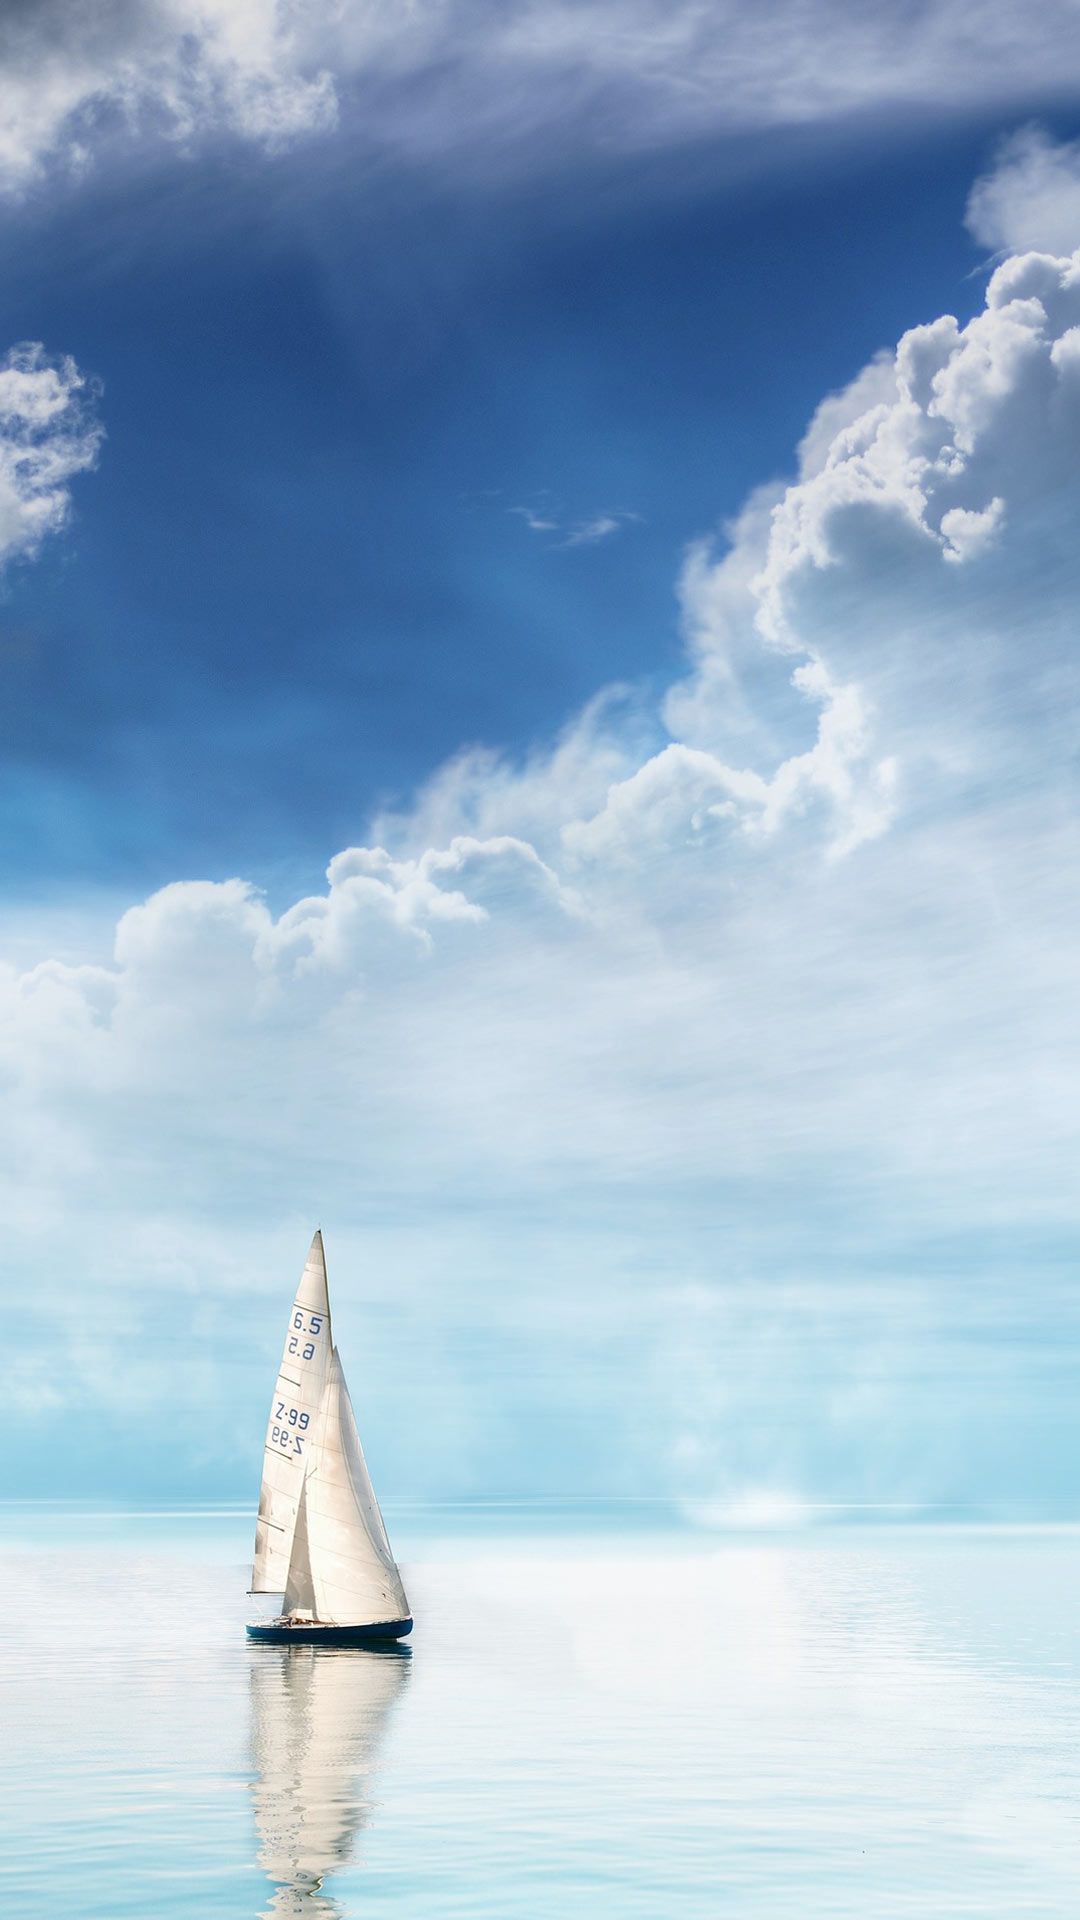 Sailboat wallpaper for android mobile phone free download HD image